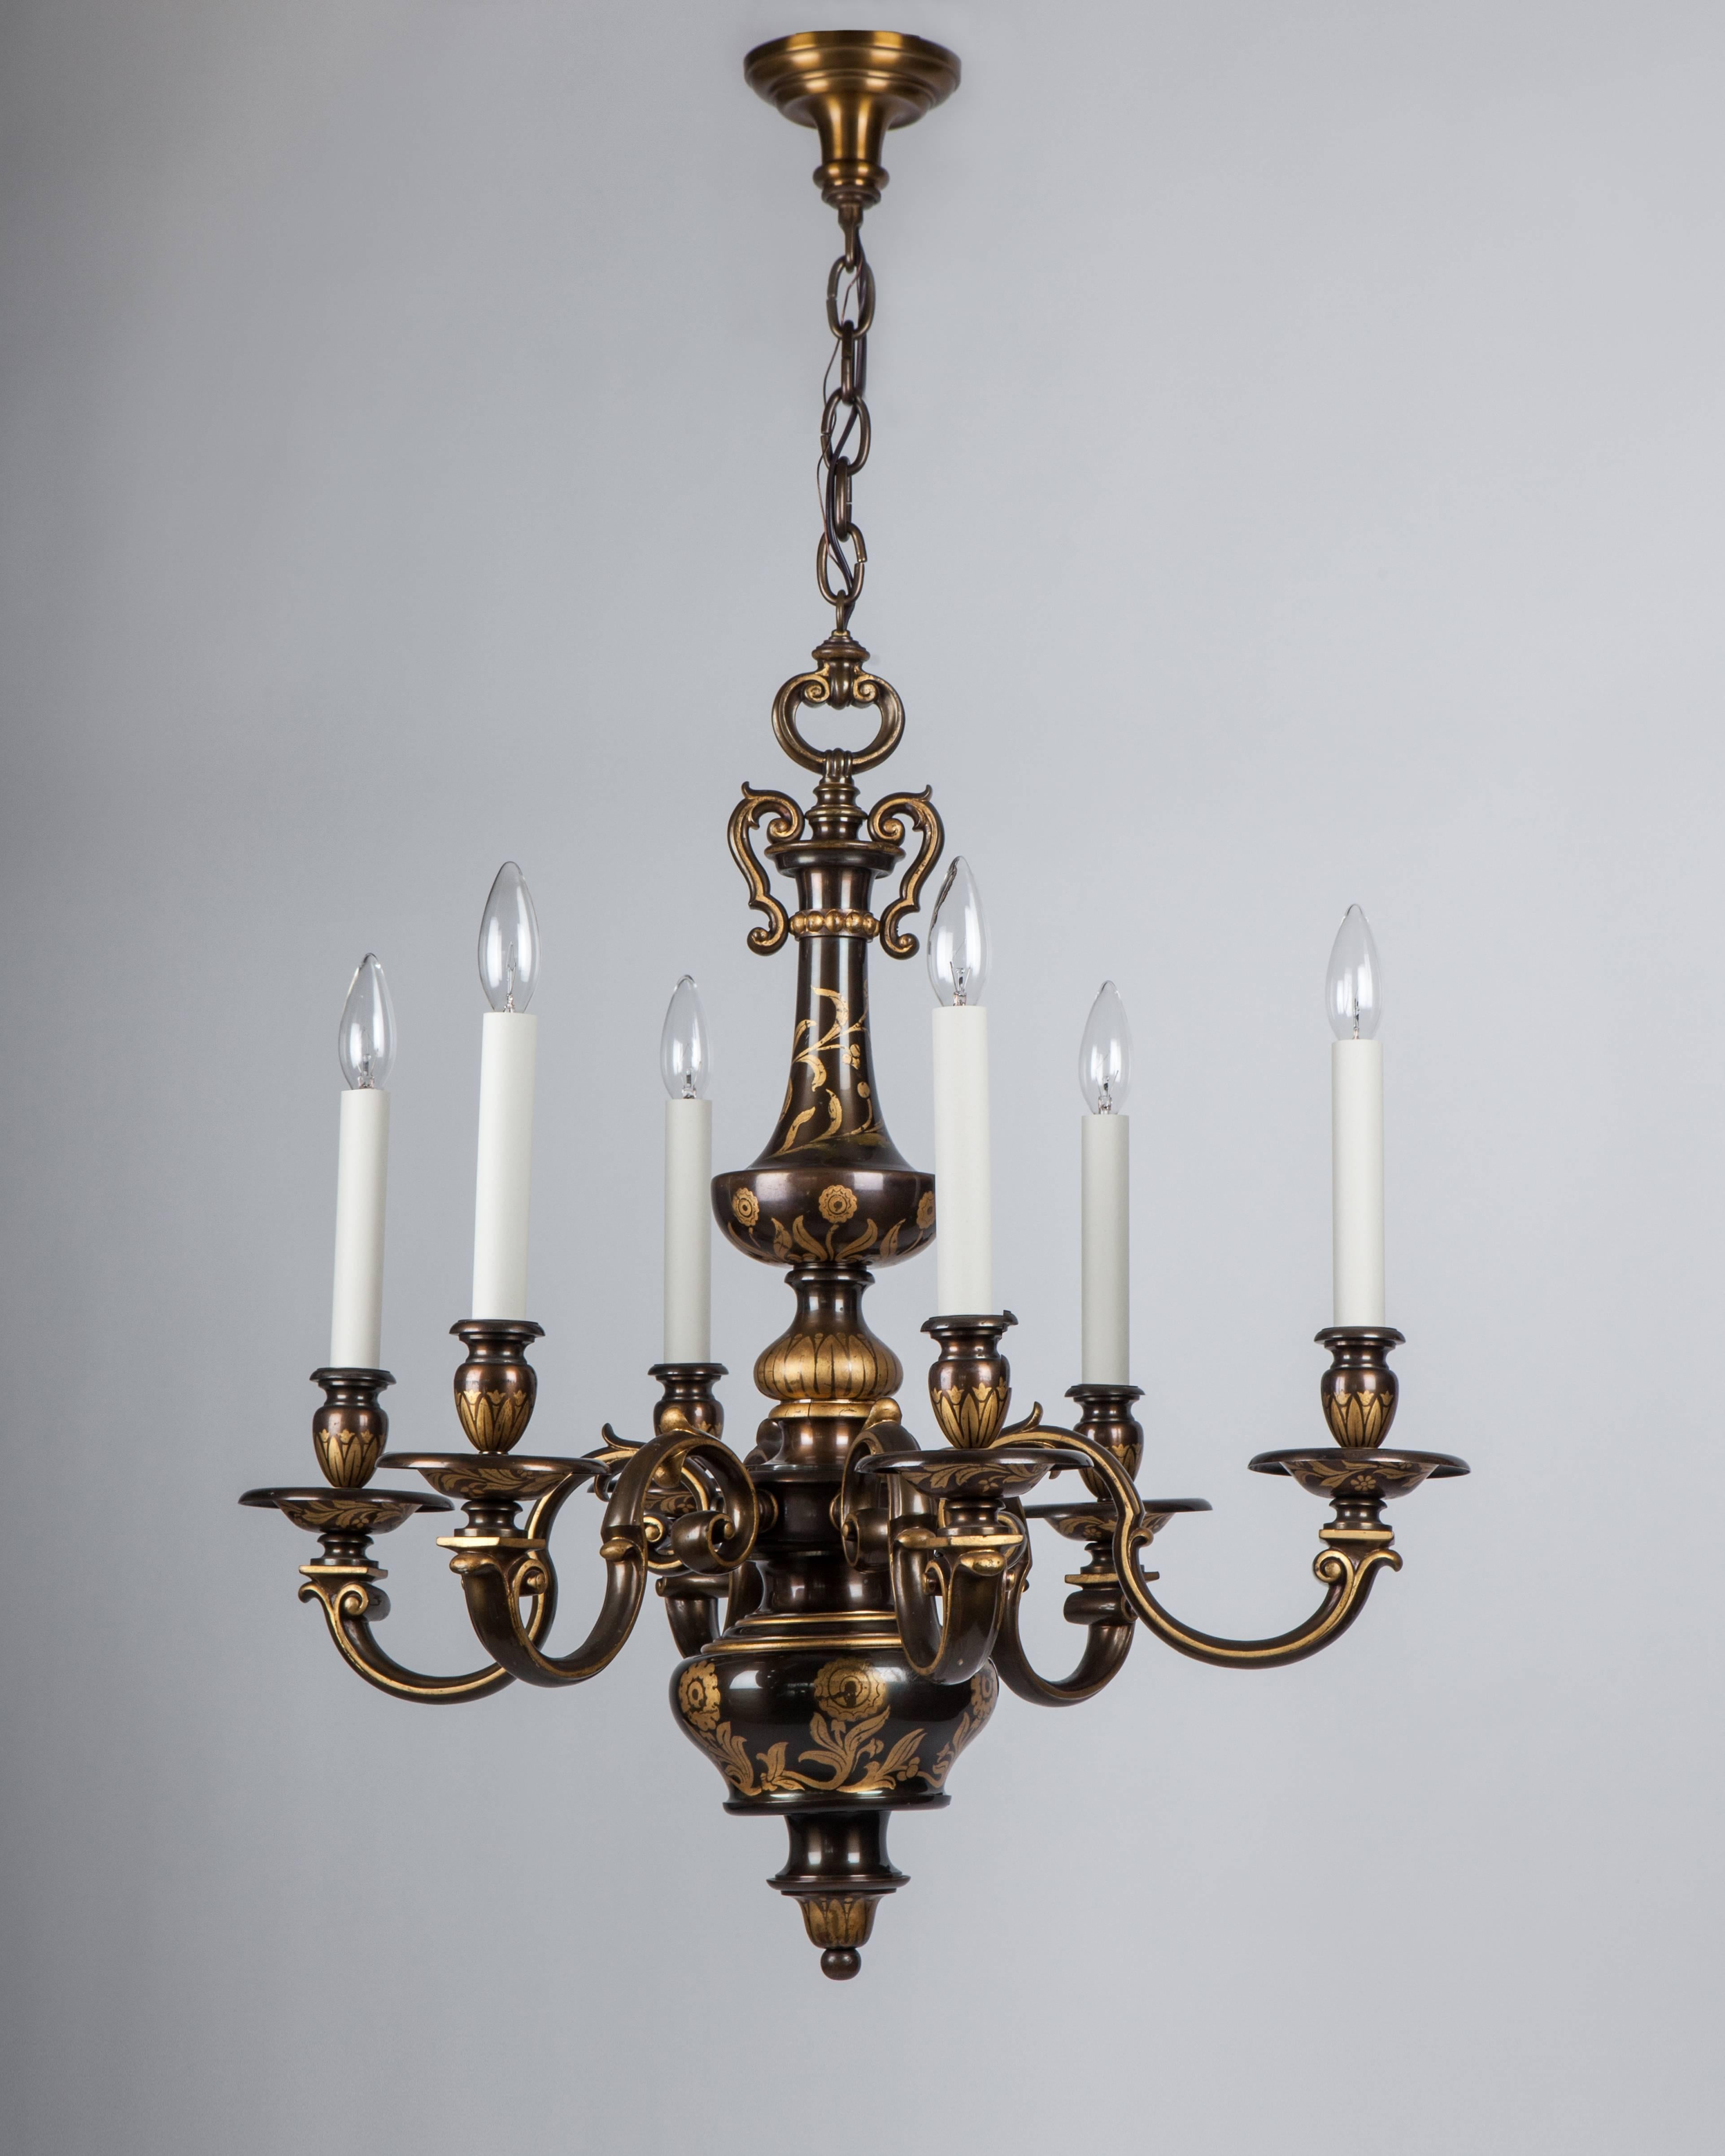 AHL4009,
a six-light cast bronze chandelier in its original dark patina finish with gilded foliate-form highlights.

Dimensions:
Current height: 57